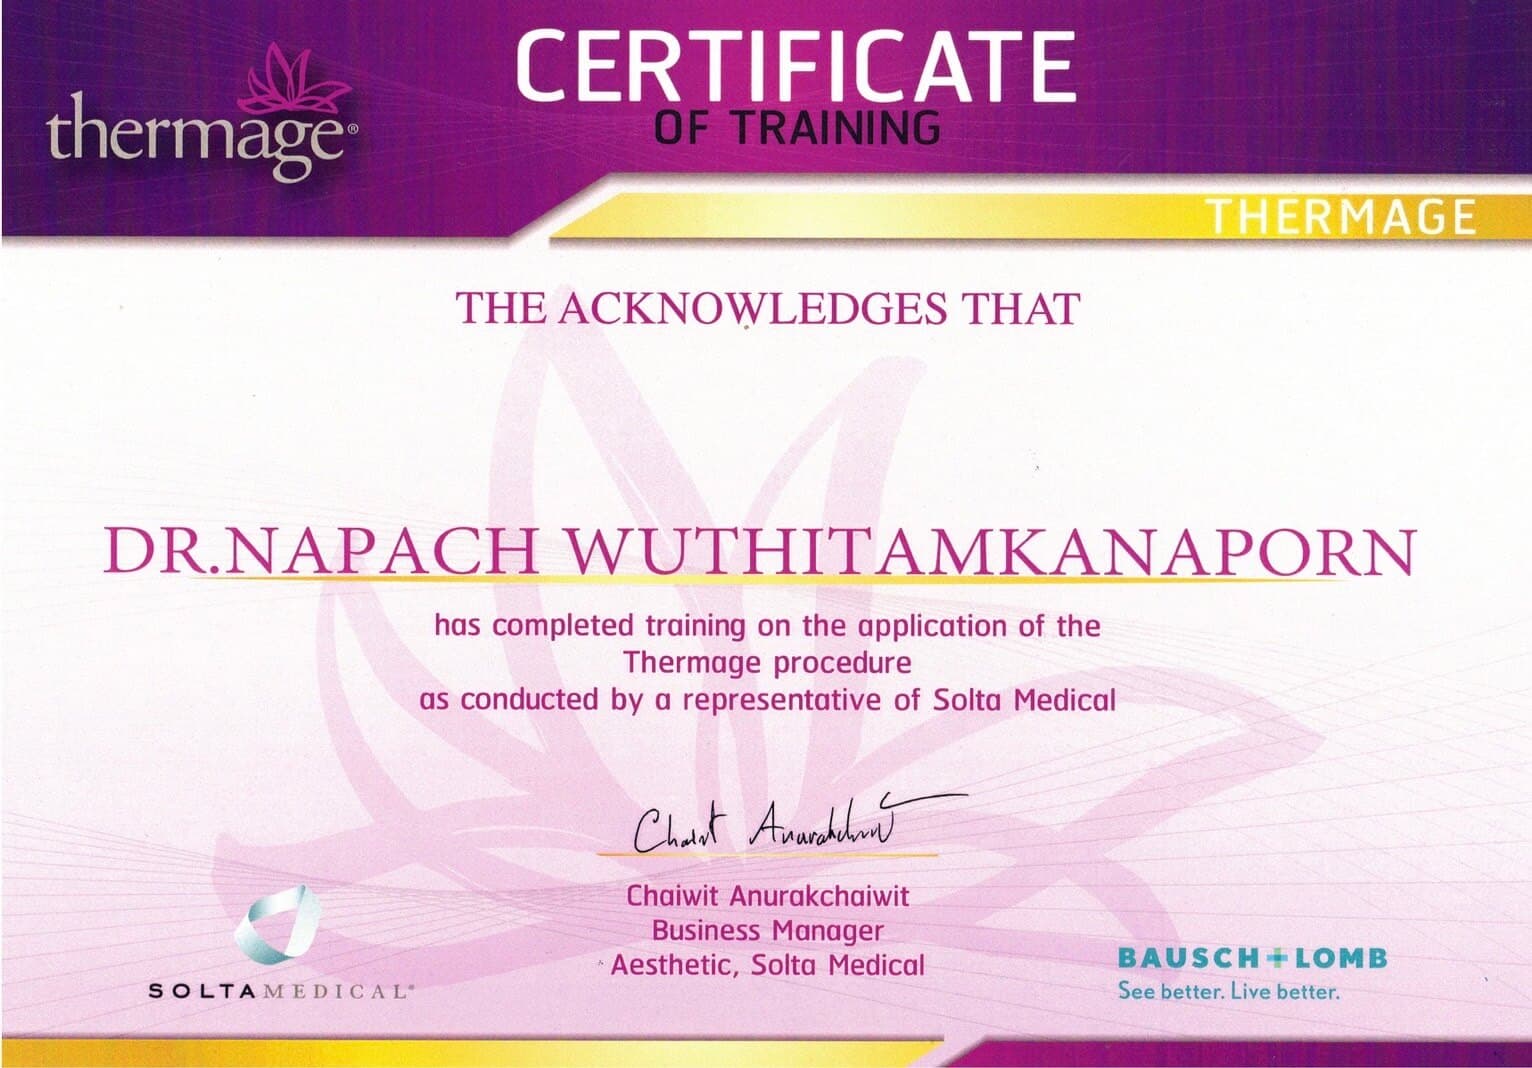 dr-Napach-wuthitamkanaporn-certificate-8